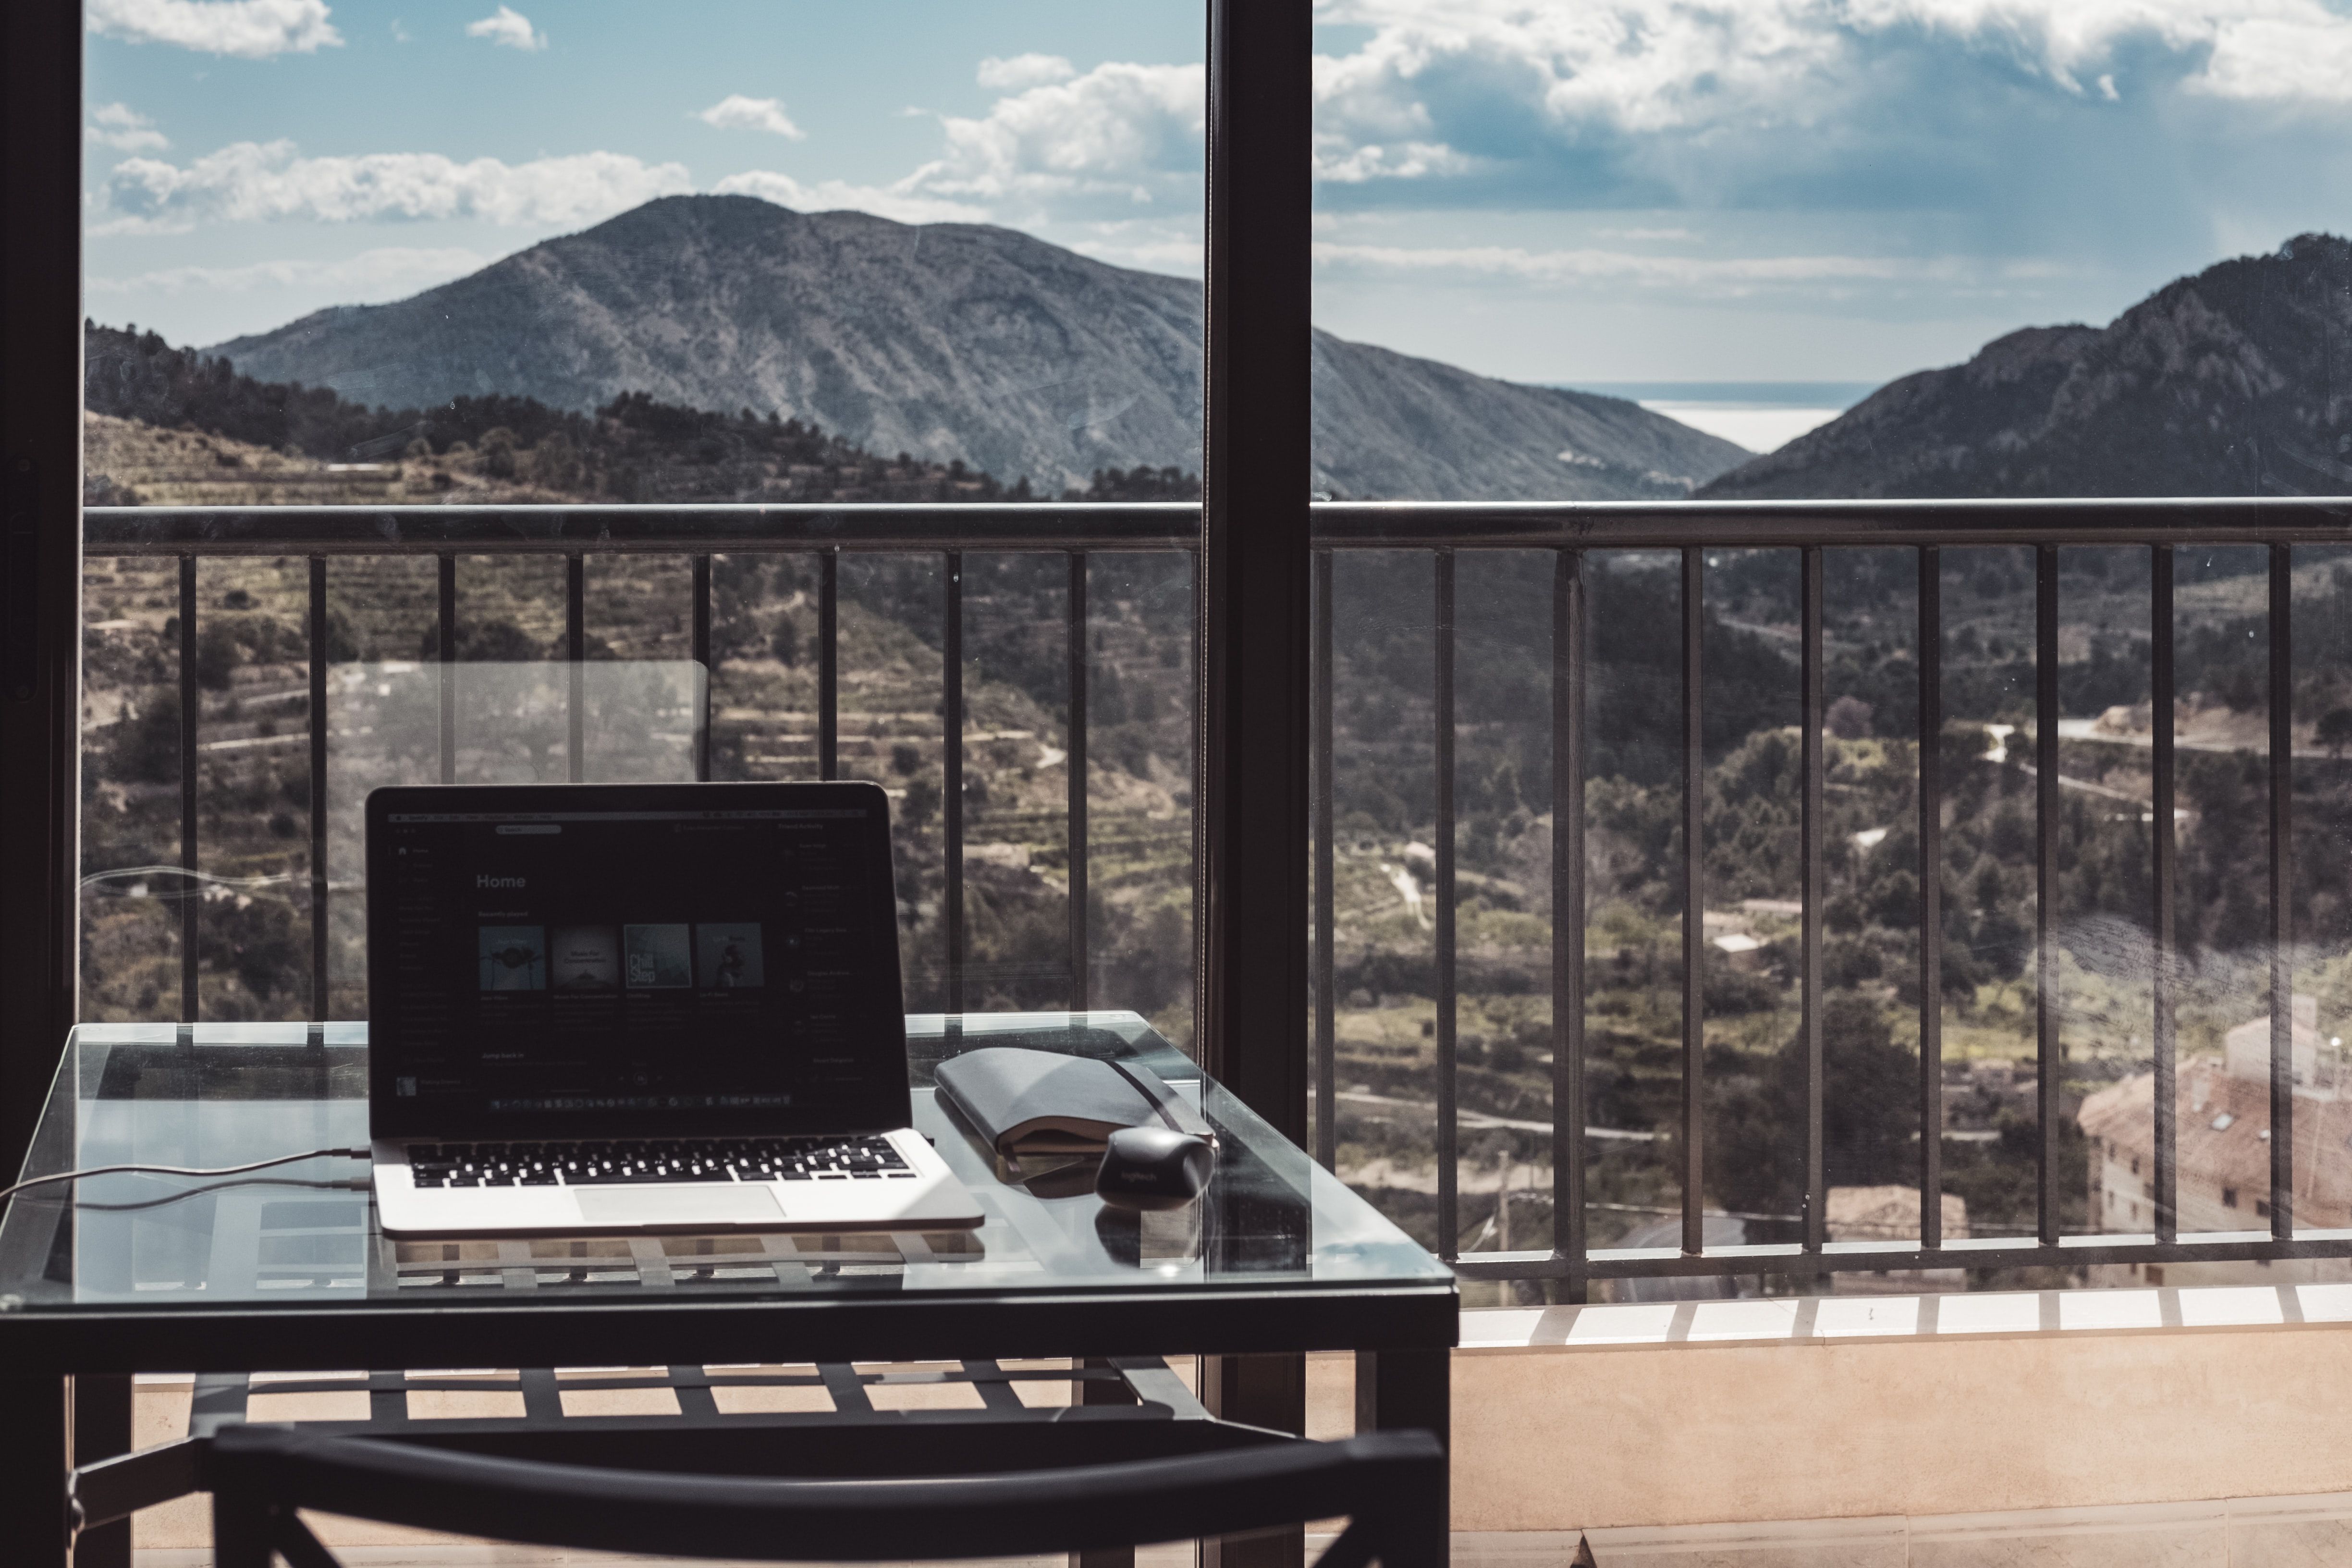 A person working remotely on a balcony.